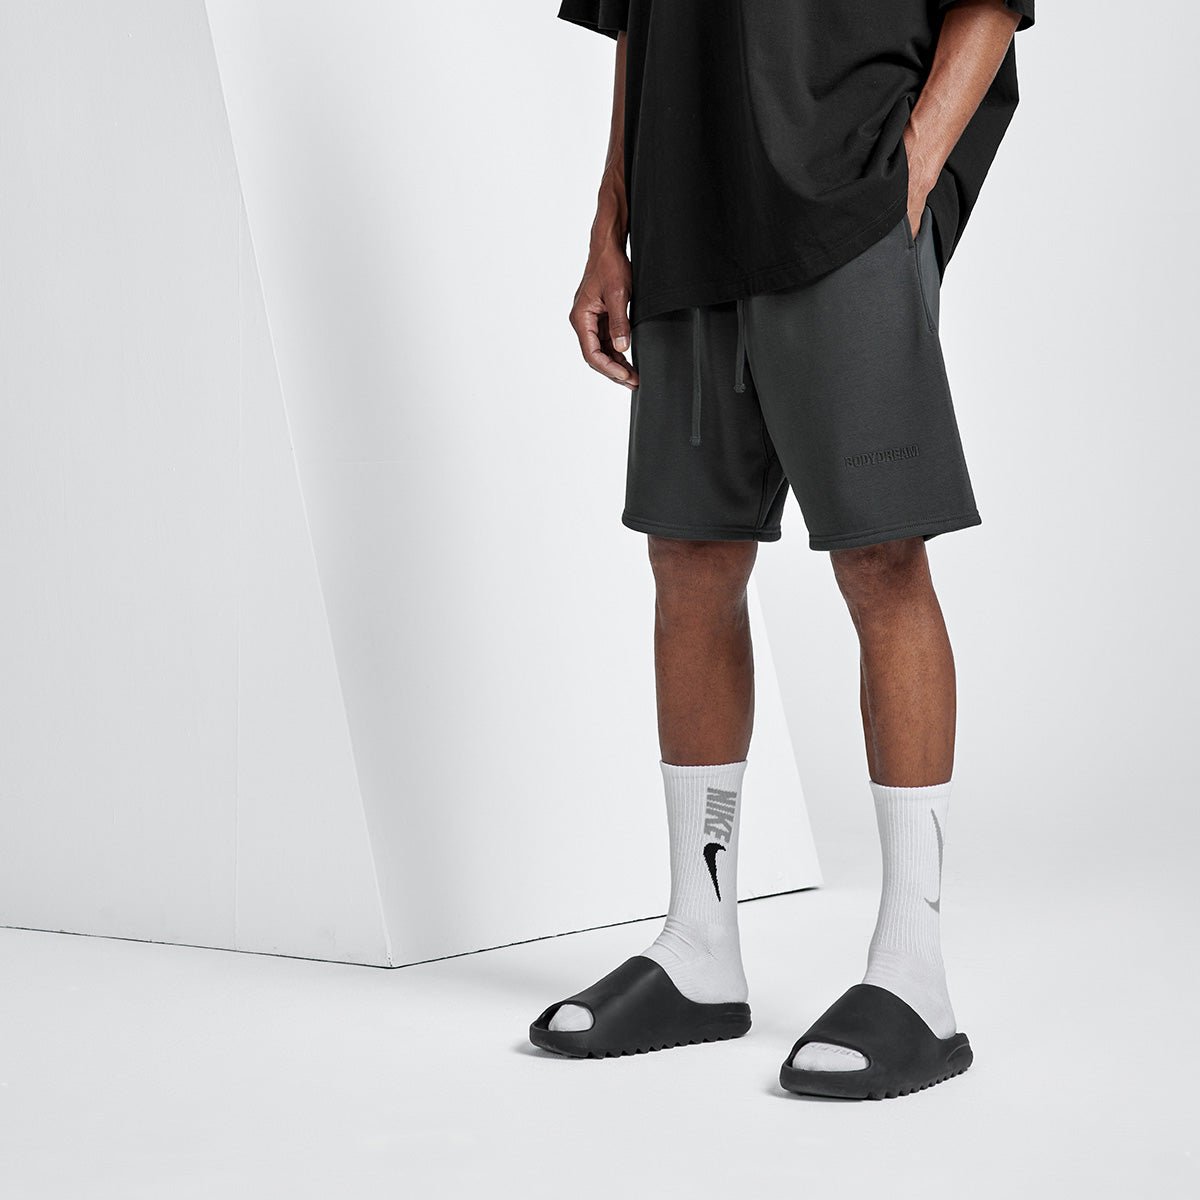 Relaxed Heavyweight Black Track Shorts - 0cm